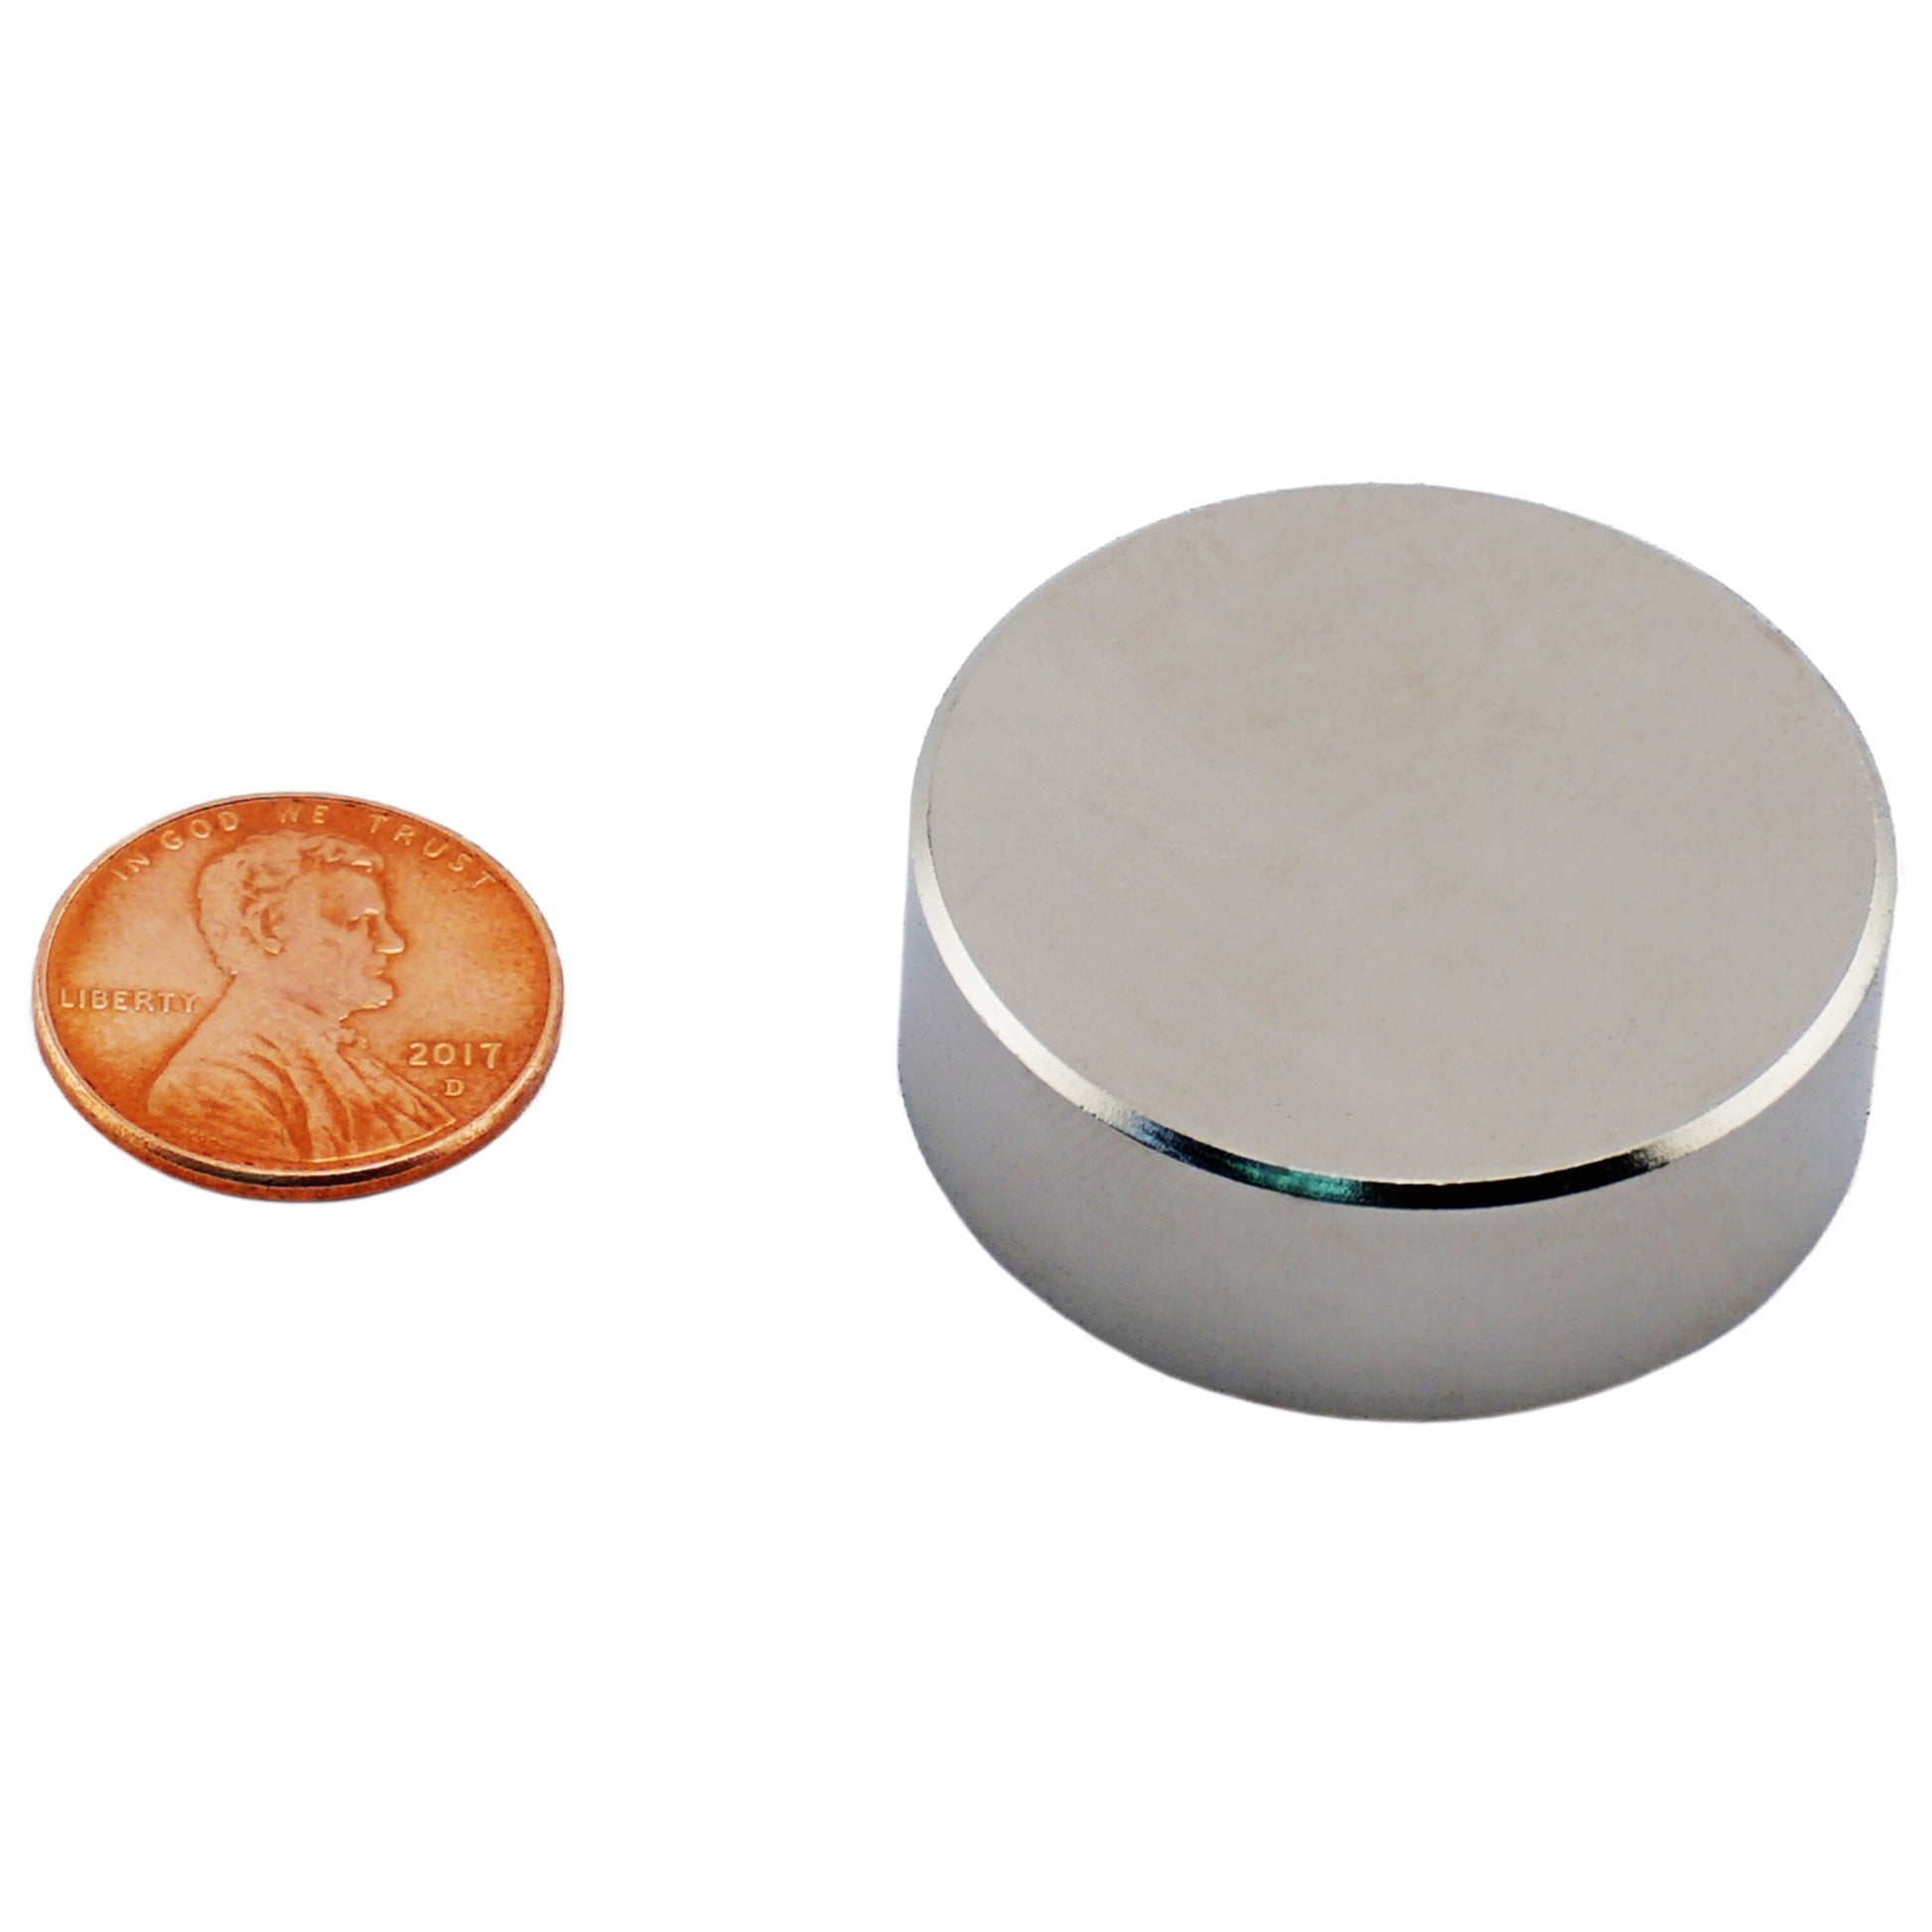 Load image into Gallery viewer, ND013704N Neodymium Disc Magnet - Compared to Penny for Size Reference